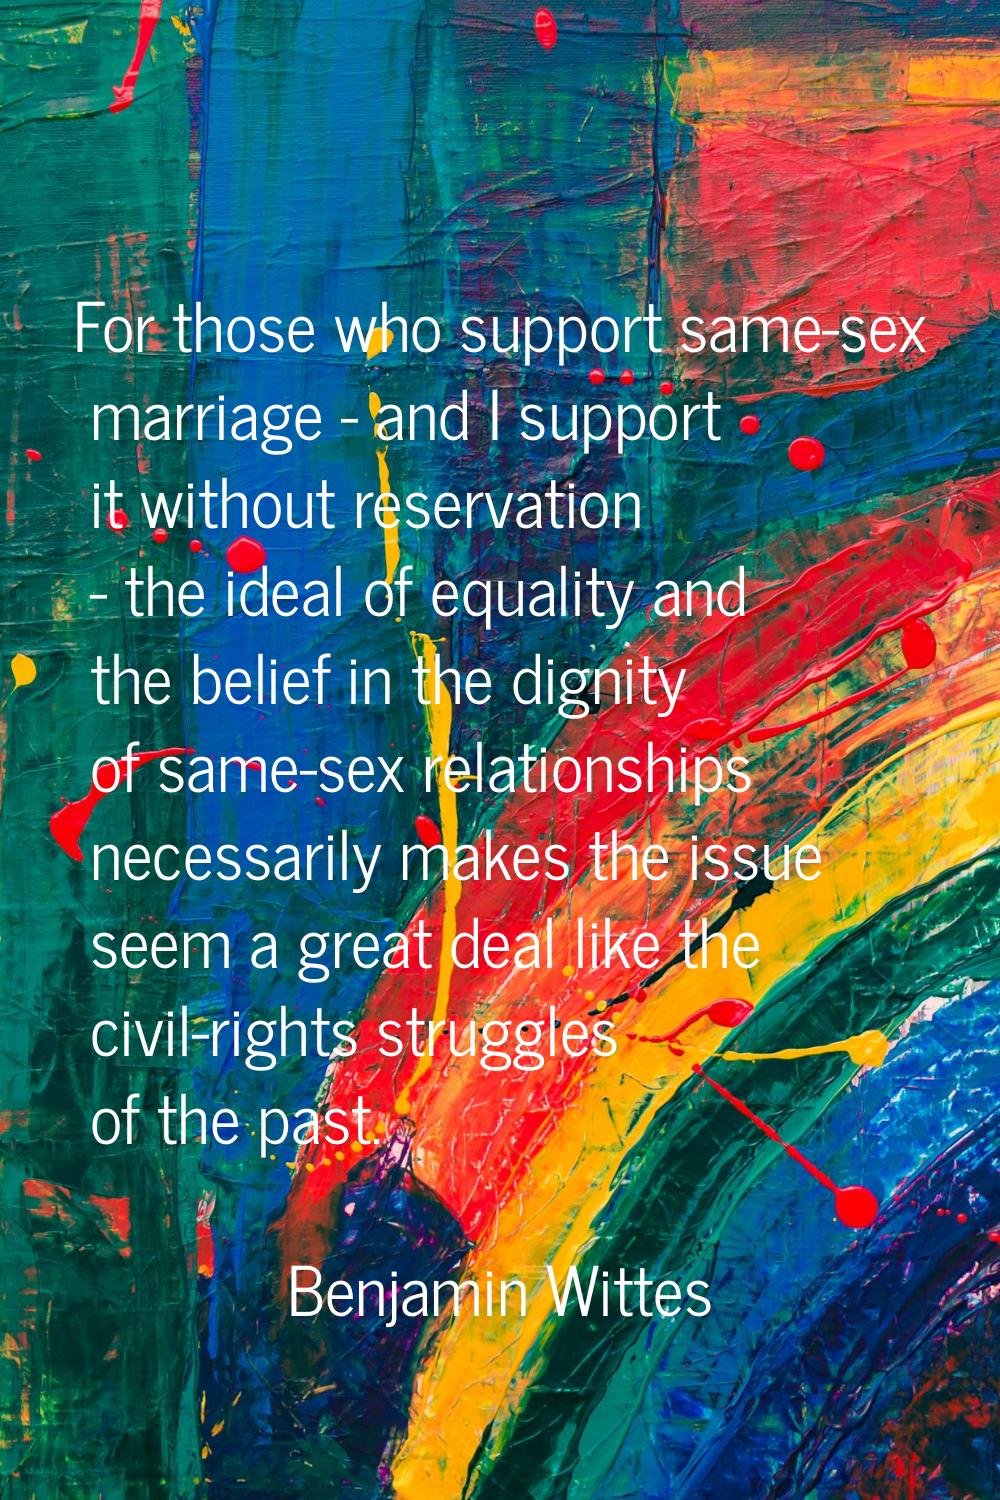 For those who support same-sex marriage - and I support it without reservation - the ideal of equal